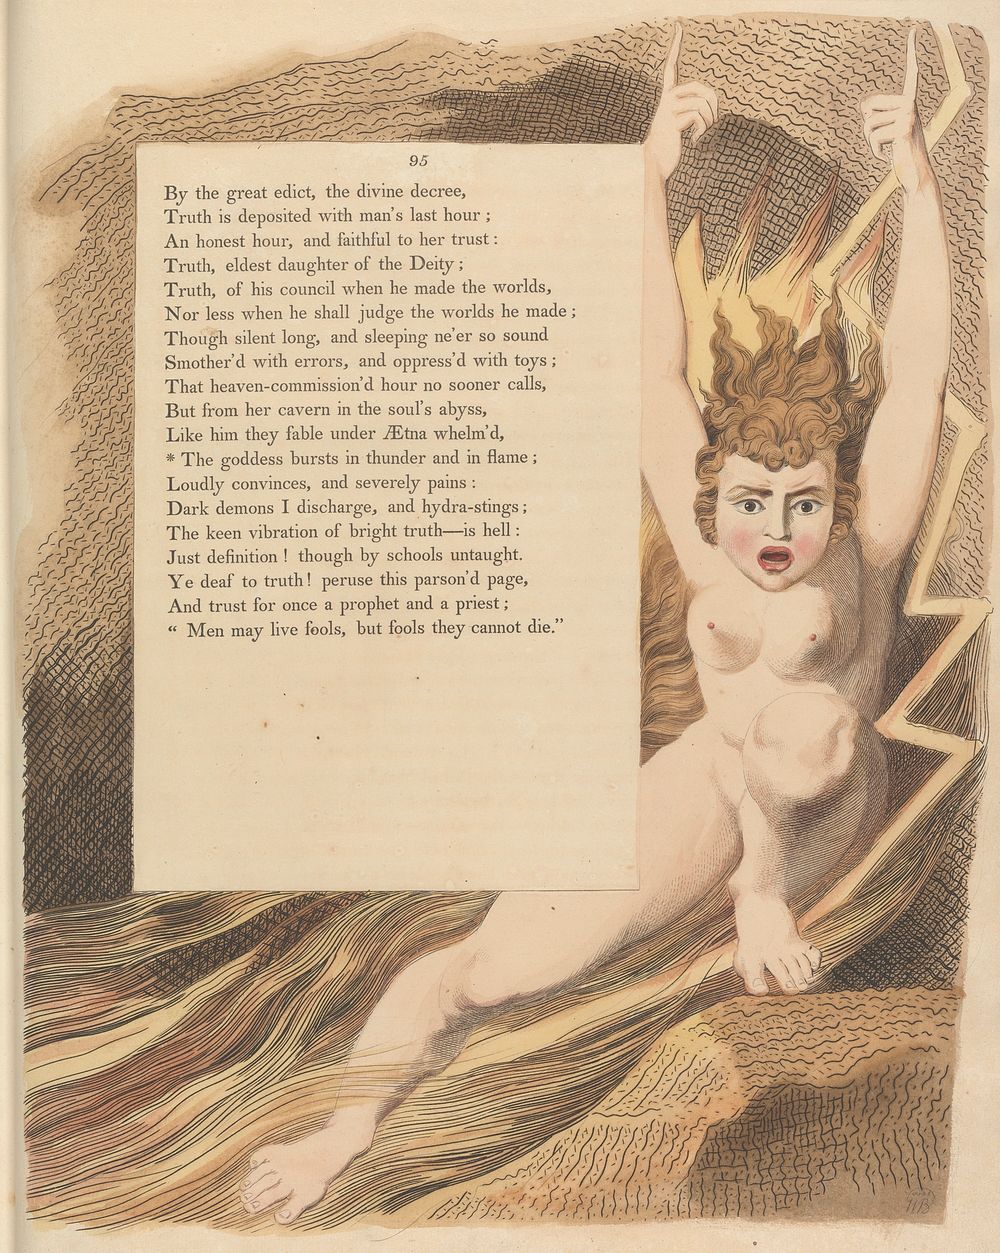 Young's Night Thoughts, Page 95, "The goddess bursts in thunder and in flame" by William Blake.